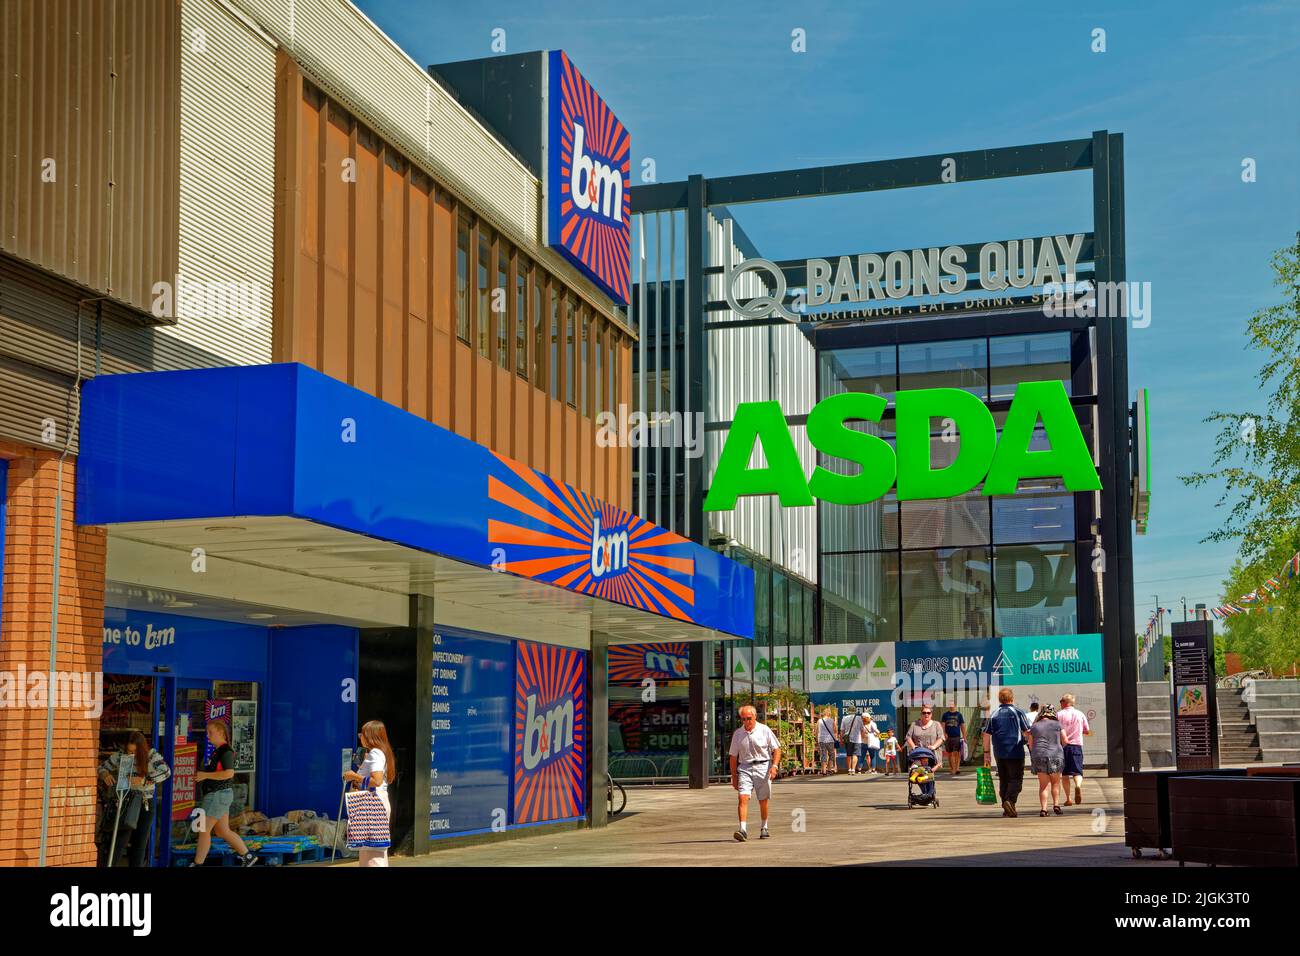 The Asda and B&M stores at new Barons Quay development in Northwich town centre, Cheshire, England, UK. B&M replaced M&S during 2021. Stock Photo